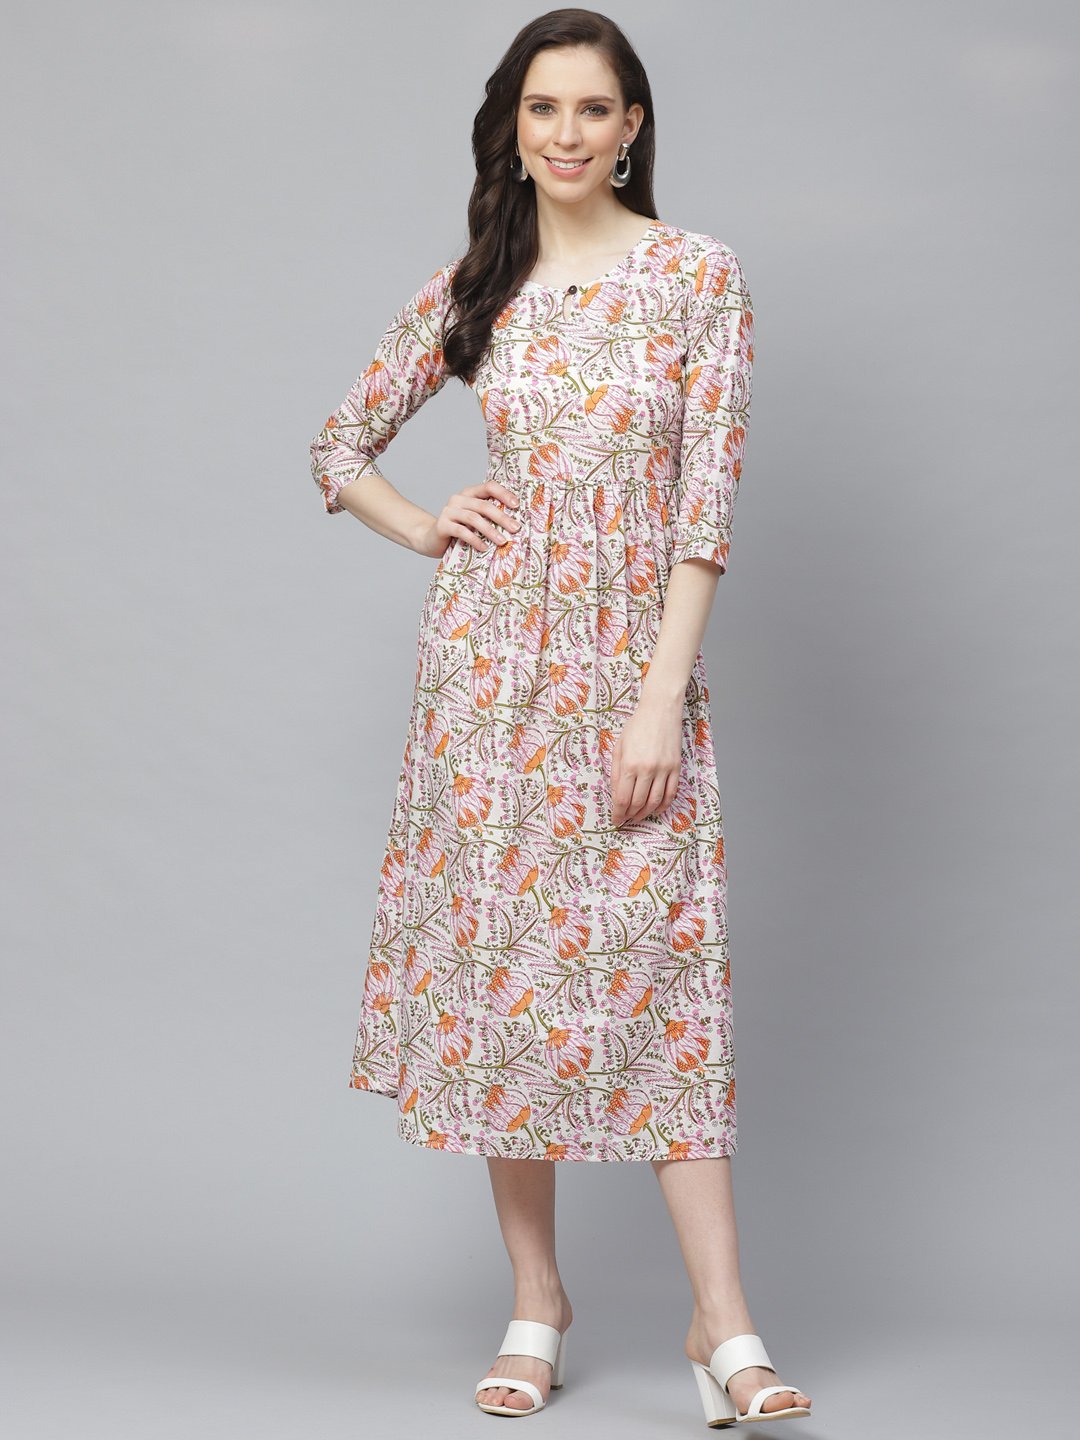 Women's White Floral Printed Keyhole Neck Cotton A-Line Dress - Nayo Clothing